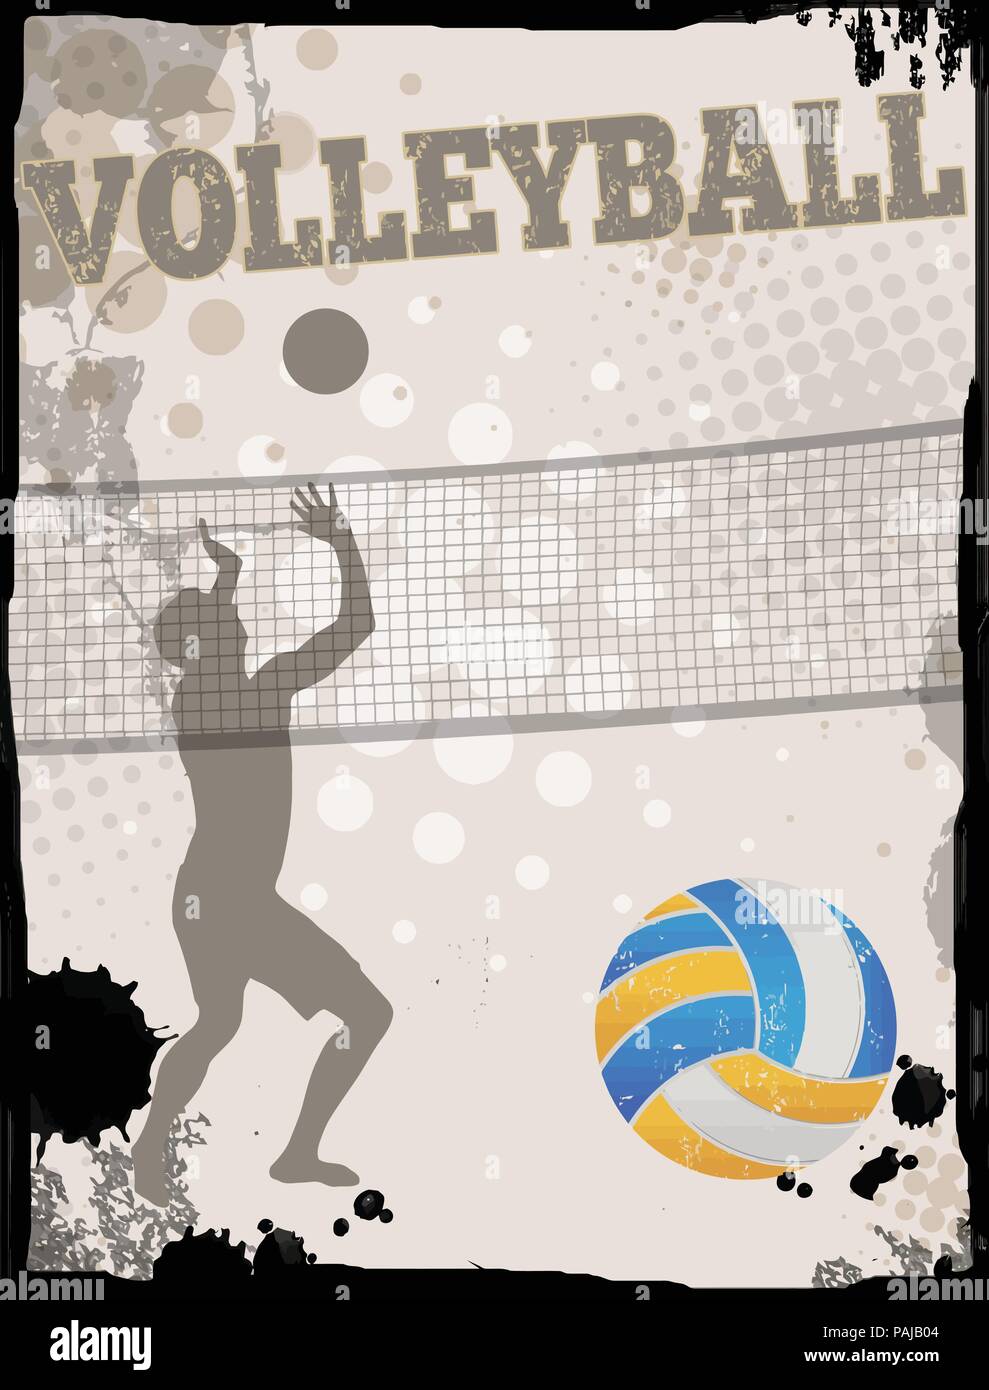 Volleyball grungy poster background, vector illustration Stock Vector